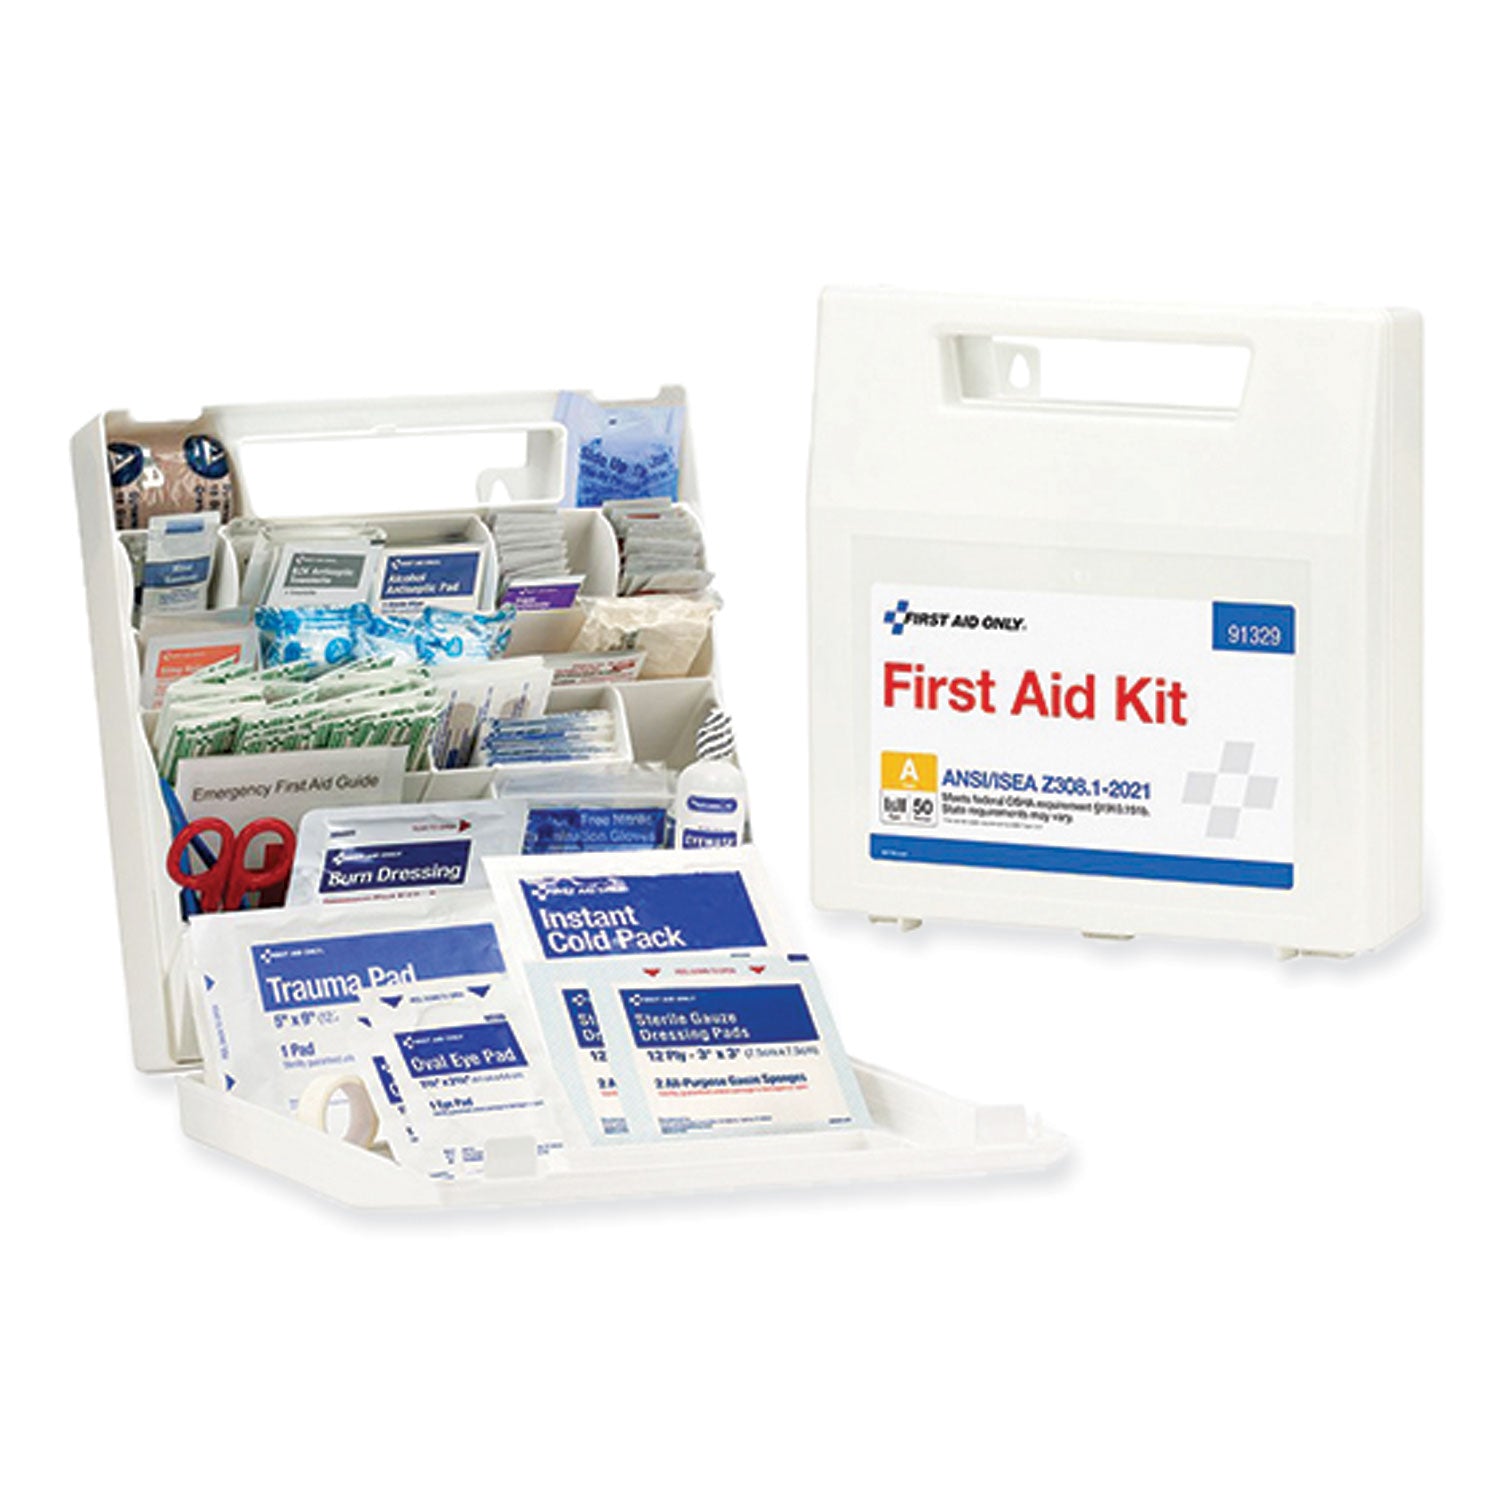 ansi-2021-first-aid-kit-for-50-people-184-pieces-plastic-case_fao91329 - 5